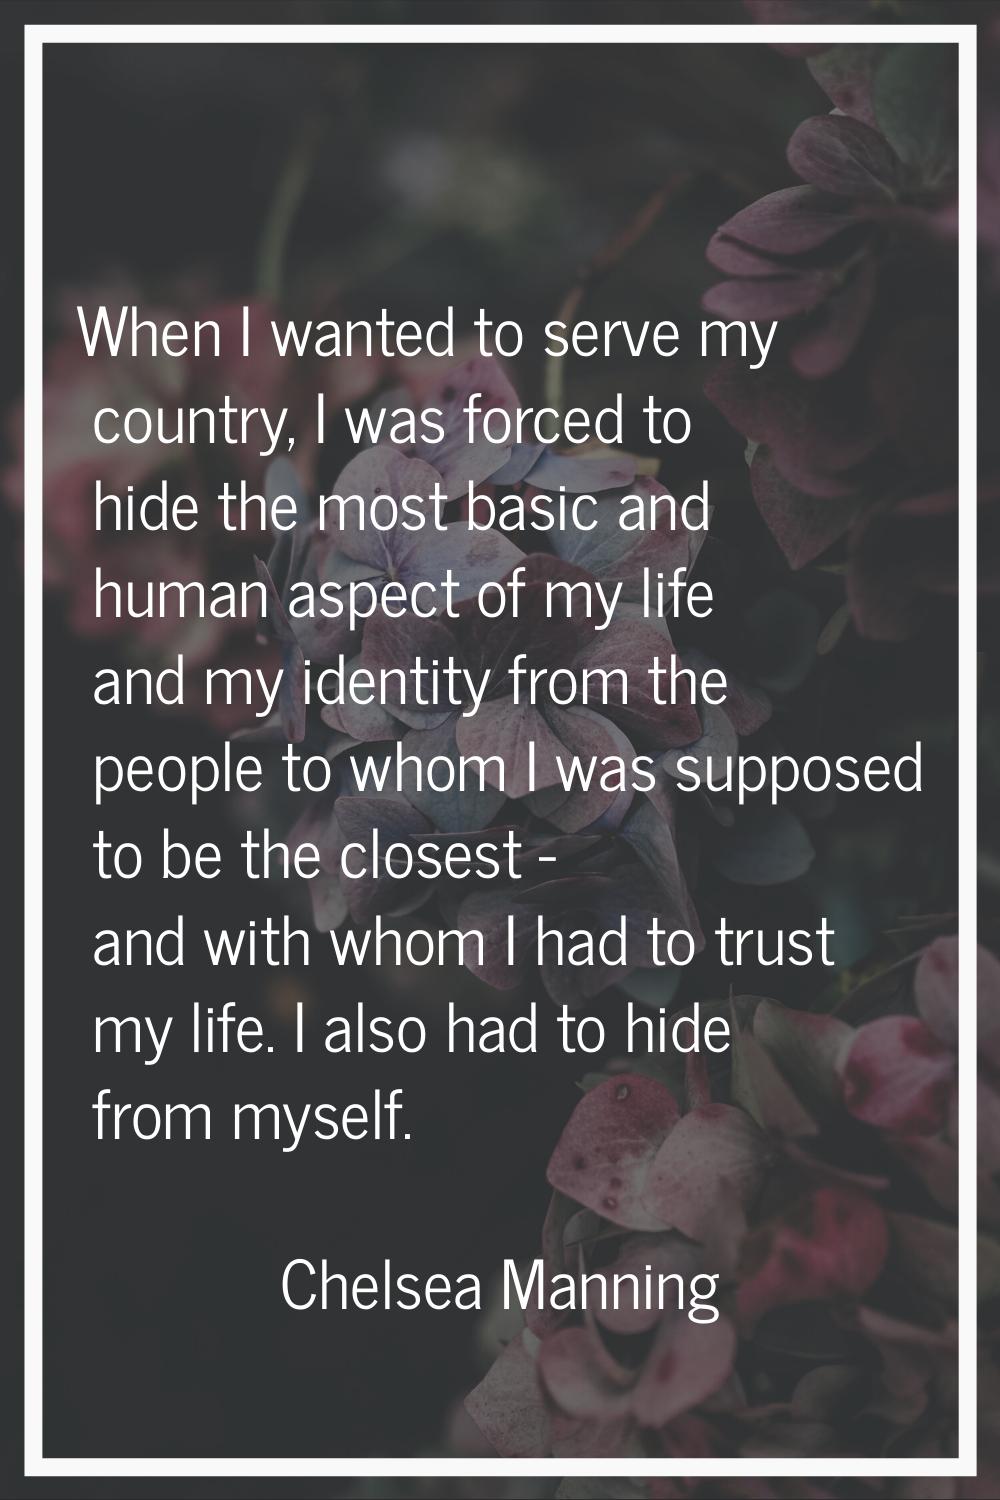 When I wanted to serve my country, I was forced to hide the most basic and human aspect of my life 